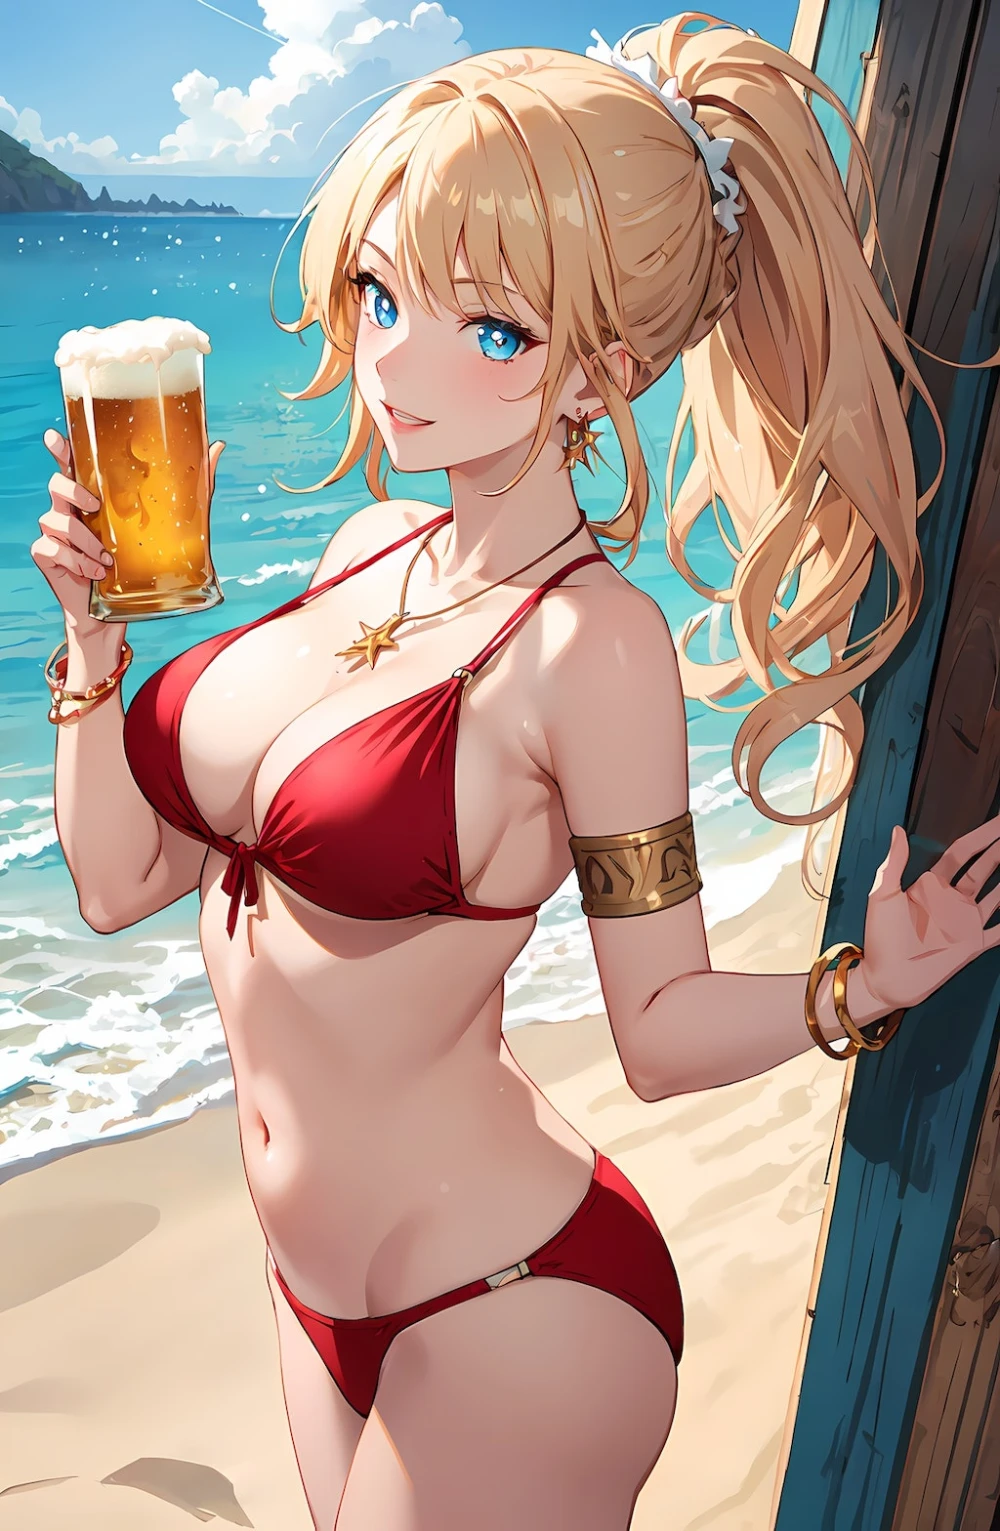 beer-anime-style-all-ages-5